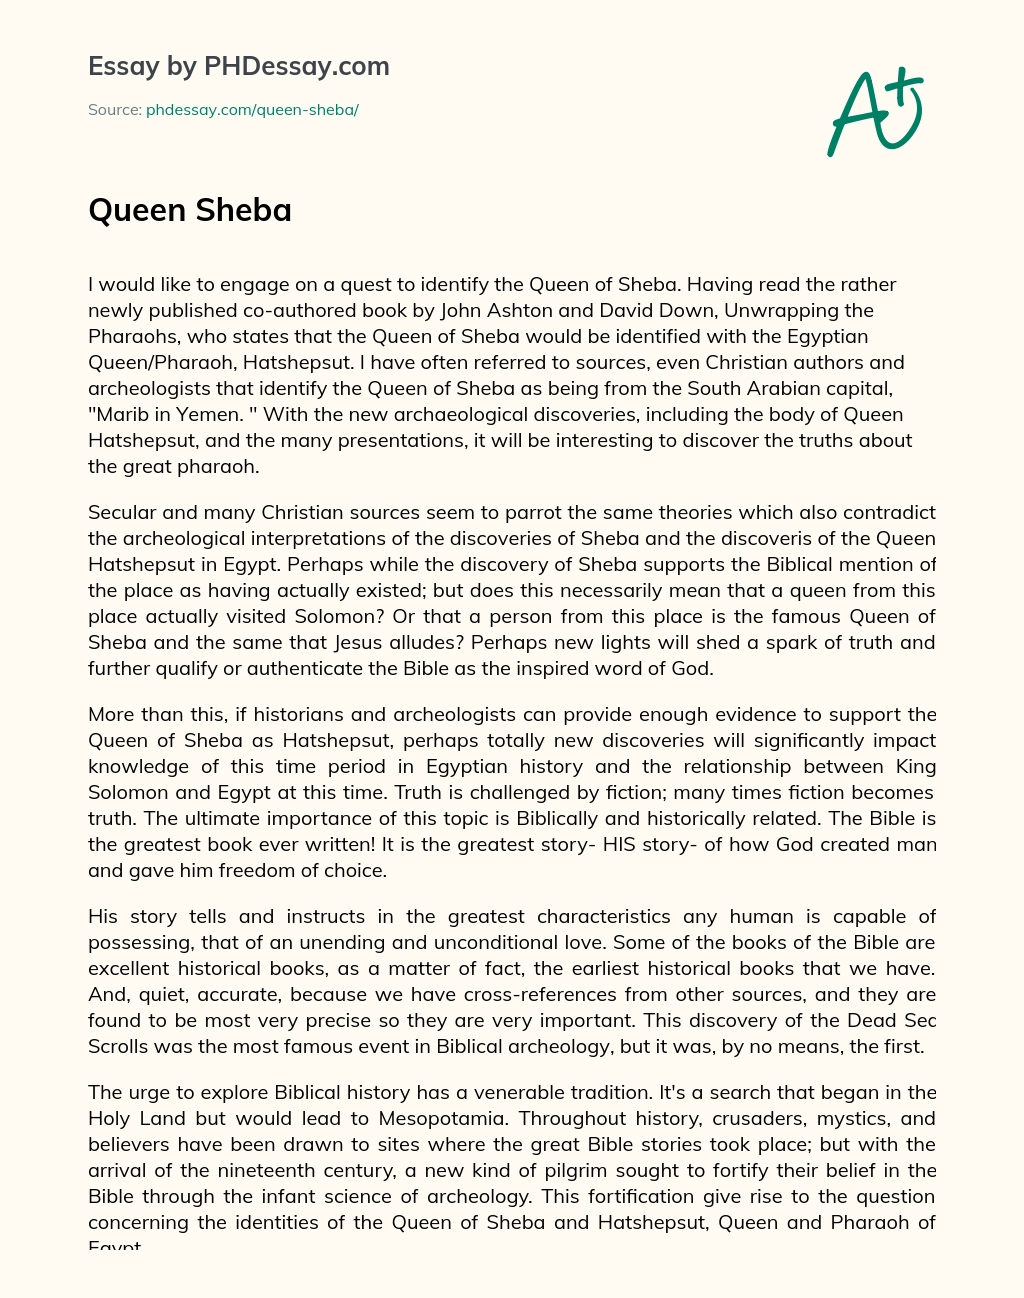 Quest to Identify the Queen of Sheba: Debating Her Origins and True Identity essay